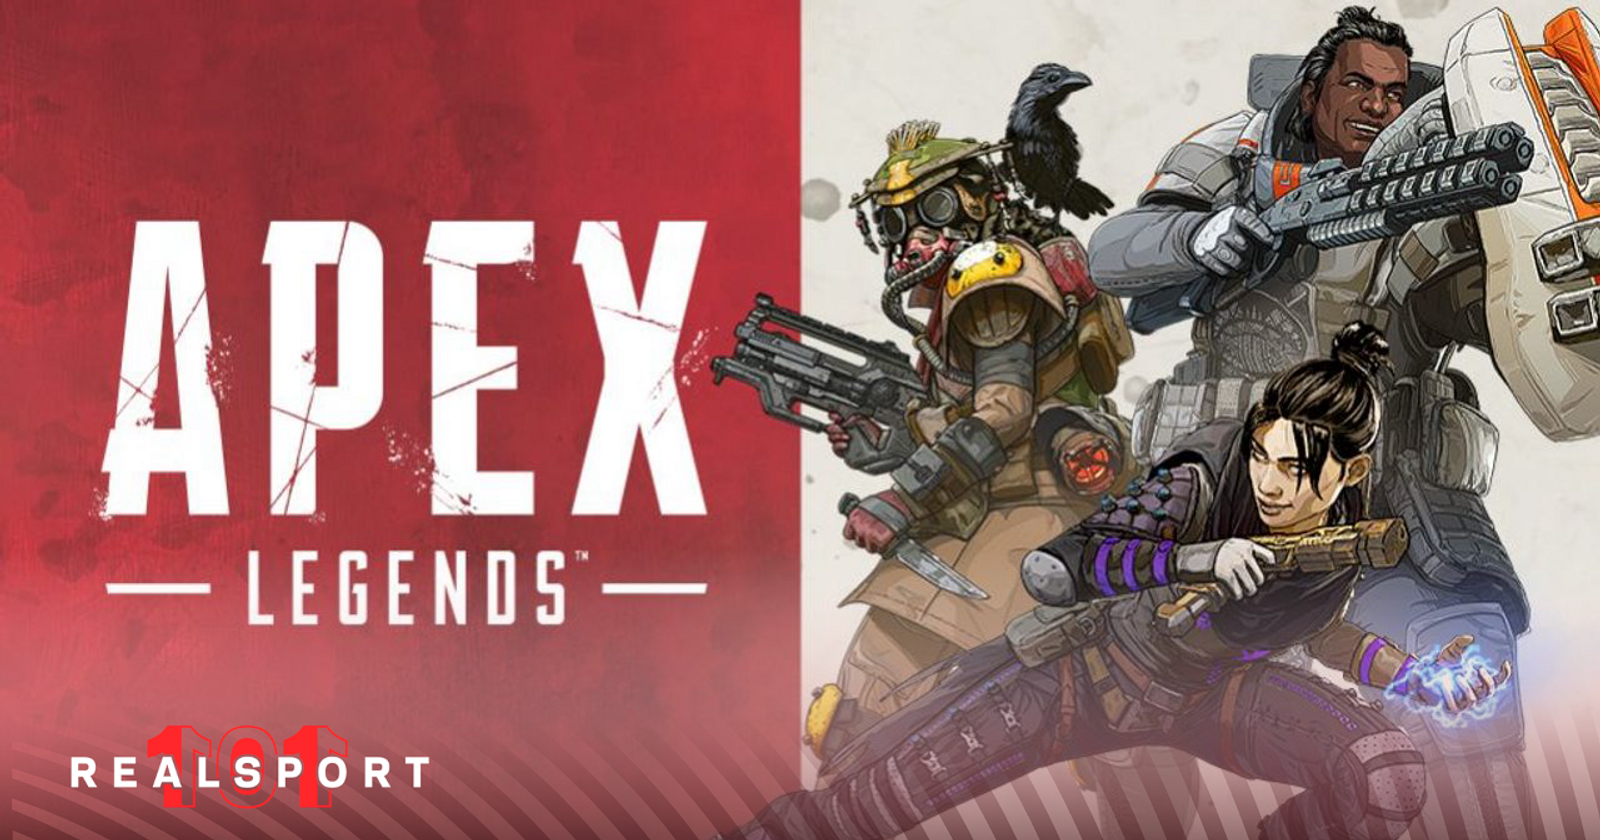 Cross Progression is Coming to Apex! But it isn't Good…